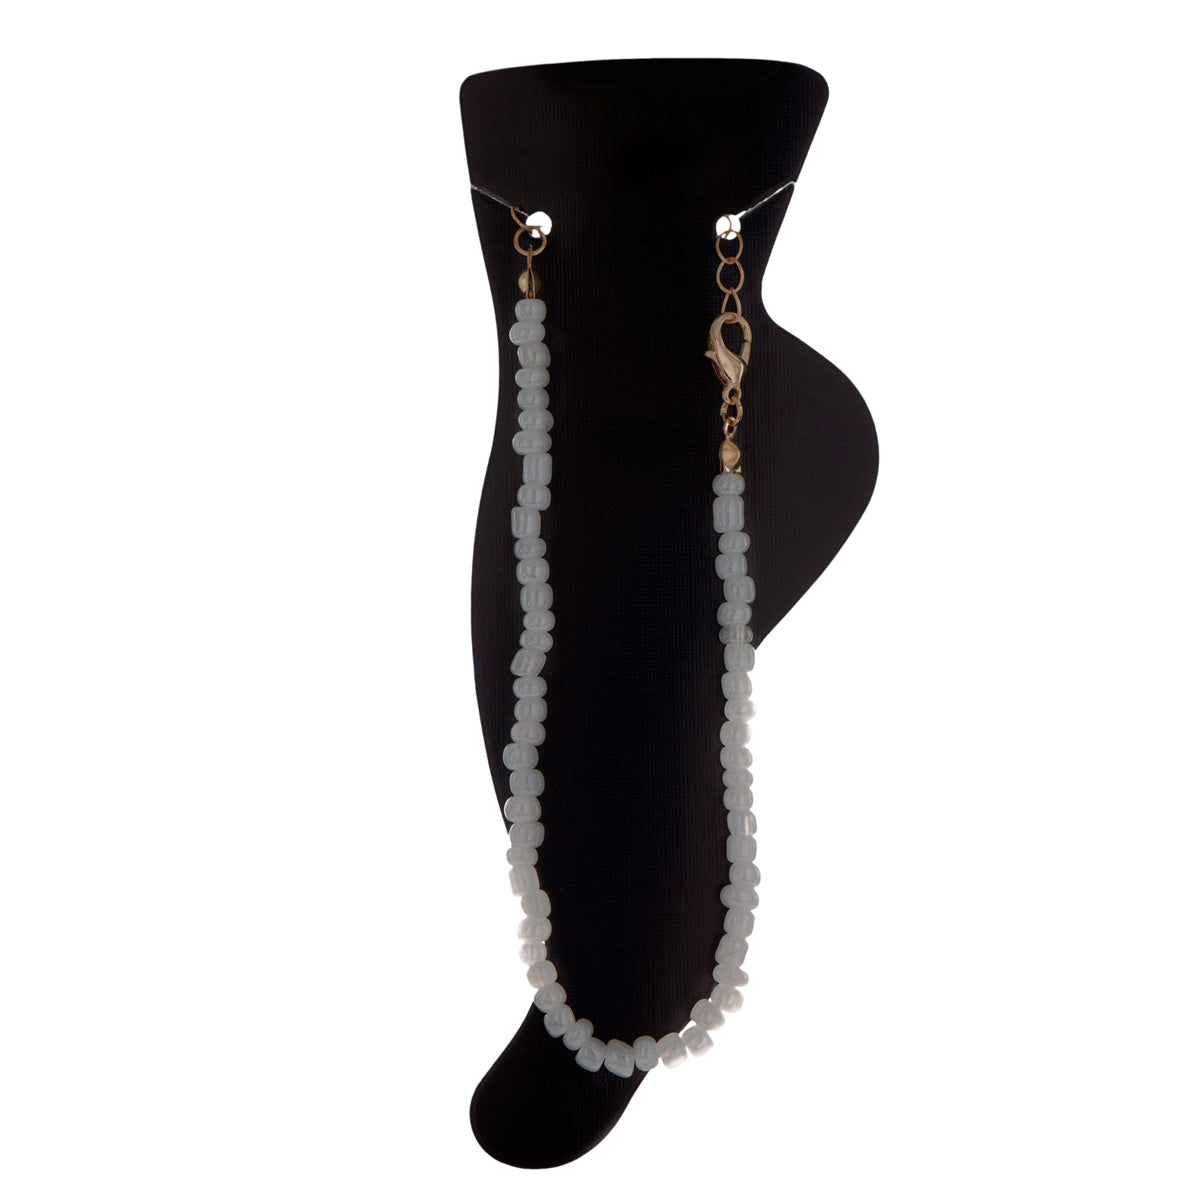 Pearl ankle chain ankle jewelry